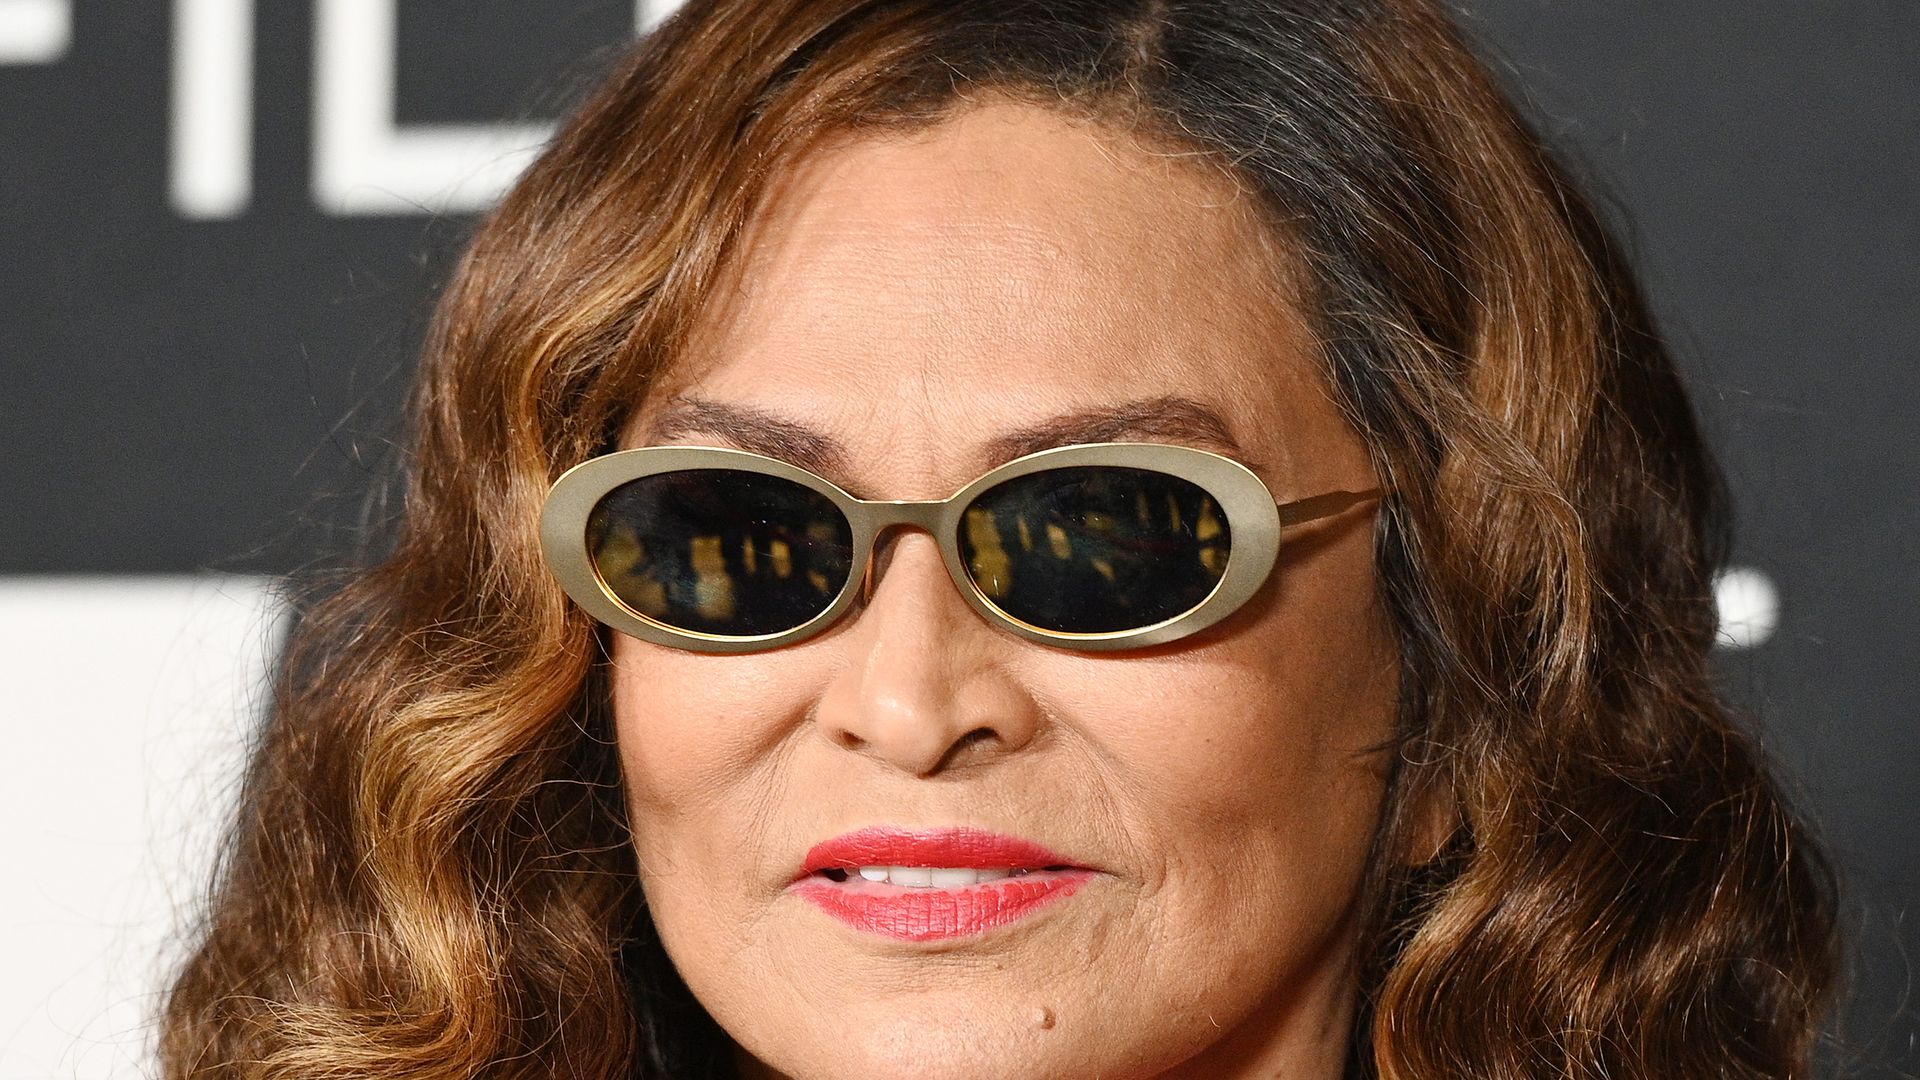 Tina Knowles at 70 - being a cheerleader to Blue Ivy, her past marriages and bond with Beyoncé